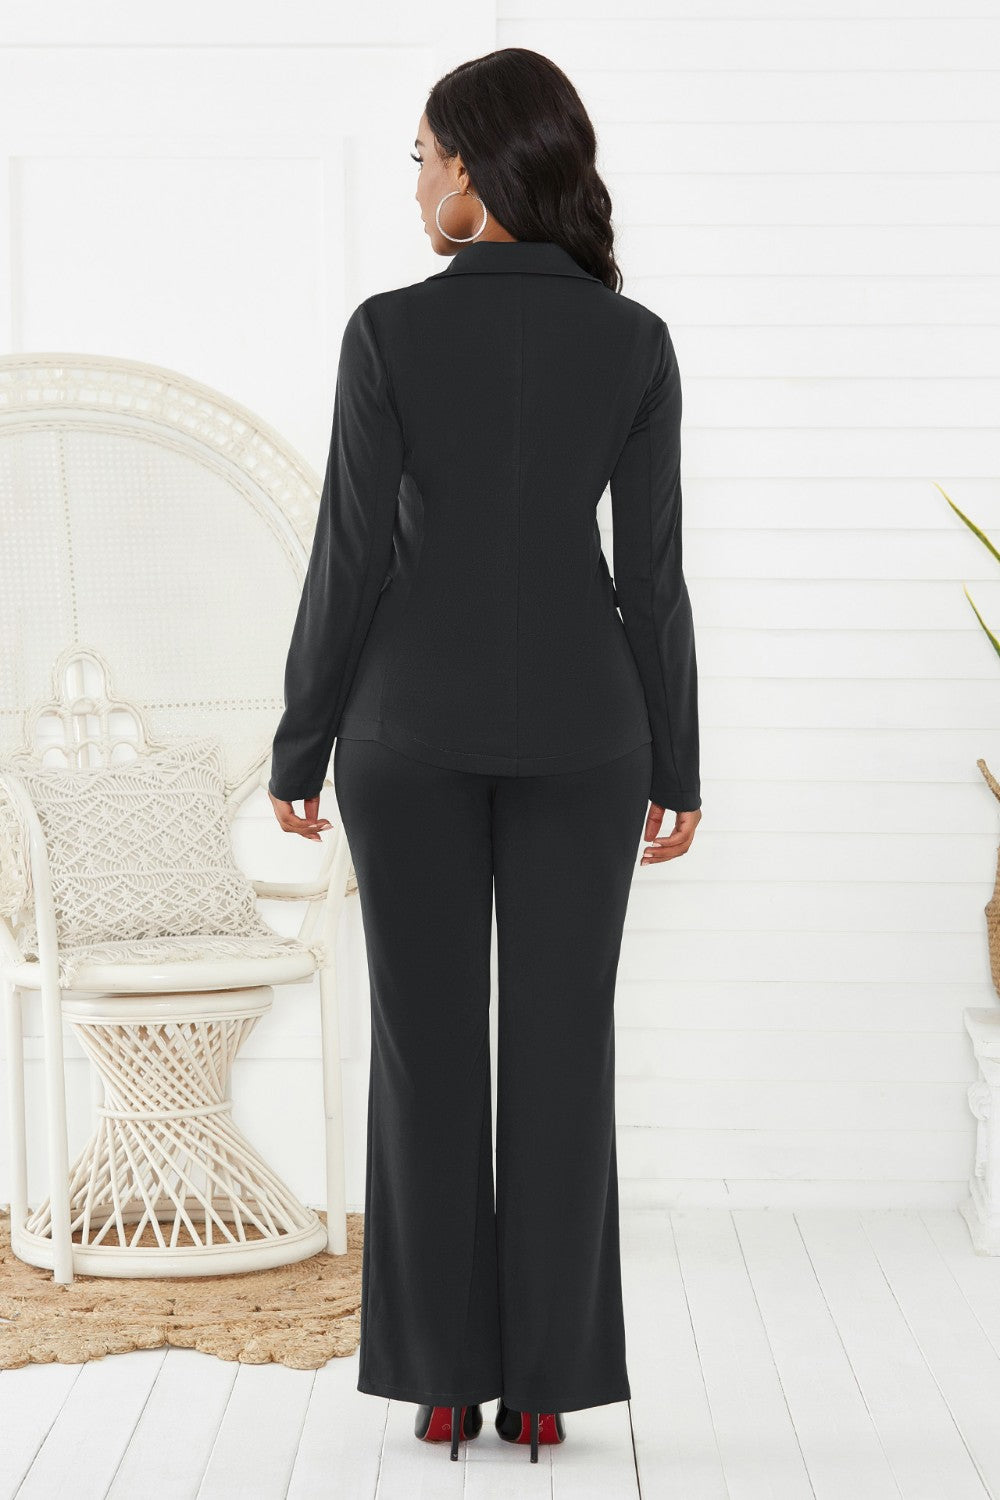 Lapel Collar Long Sleeve Blazer and Pants Set - Two Color Choices